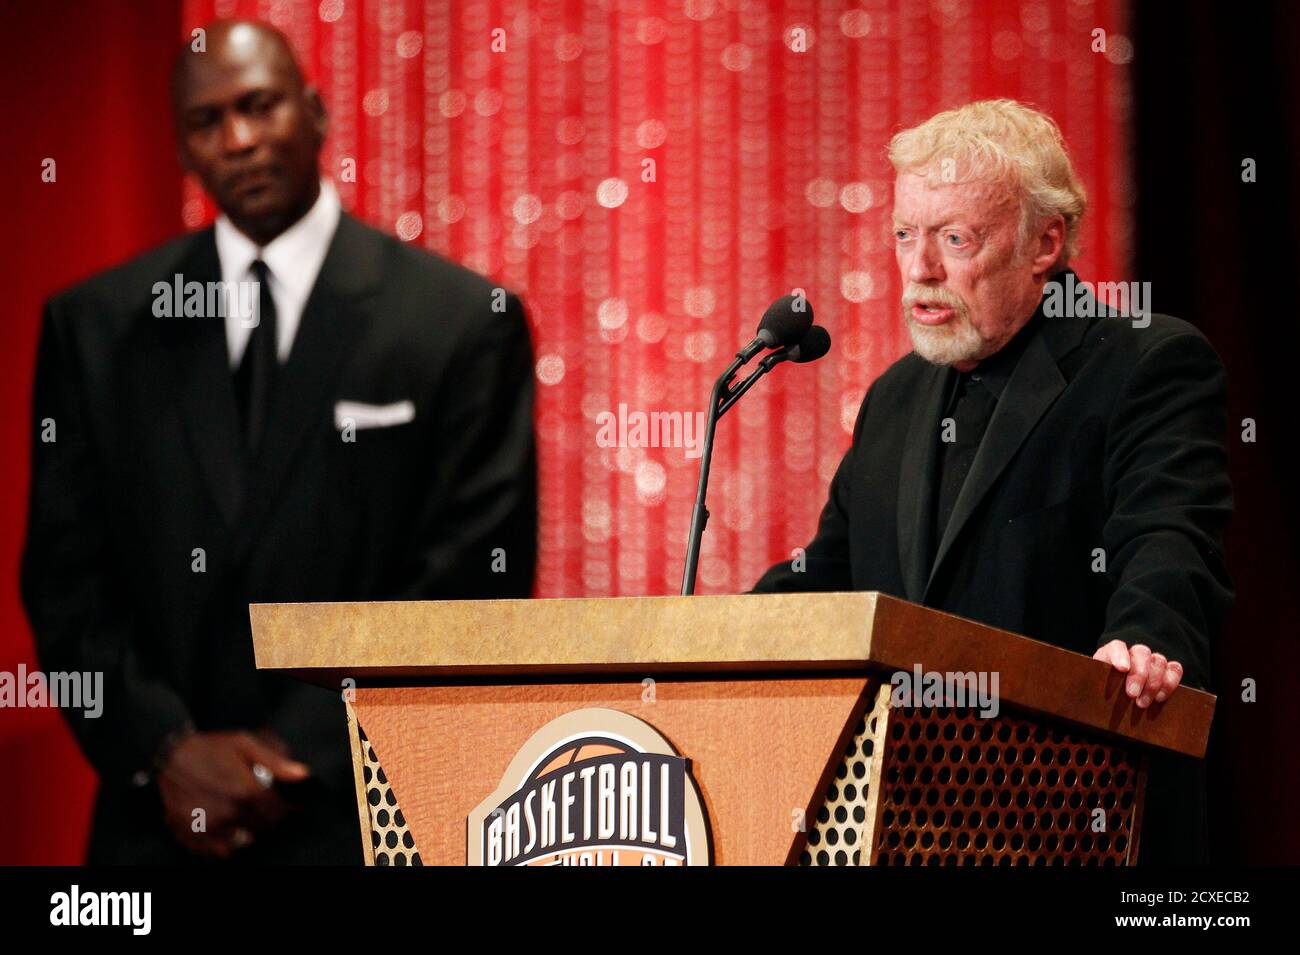 Hall of Fame player Michael Jordan presents Nike co-founder Phil Knight (R)  during the 2012 Naismith Memorial Basketball Hall of Fame enshrinement  ceremony in Springfield, Massachusetts, September 7, 2012. REUTERS/Dominick  Reuter (UNITED